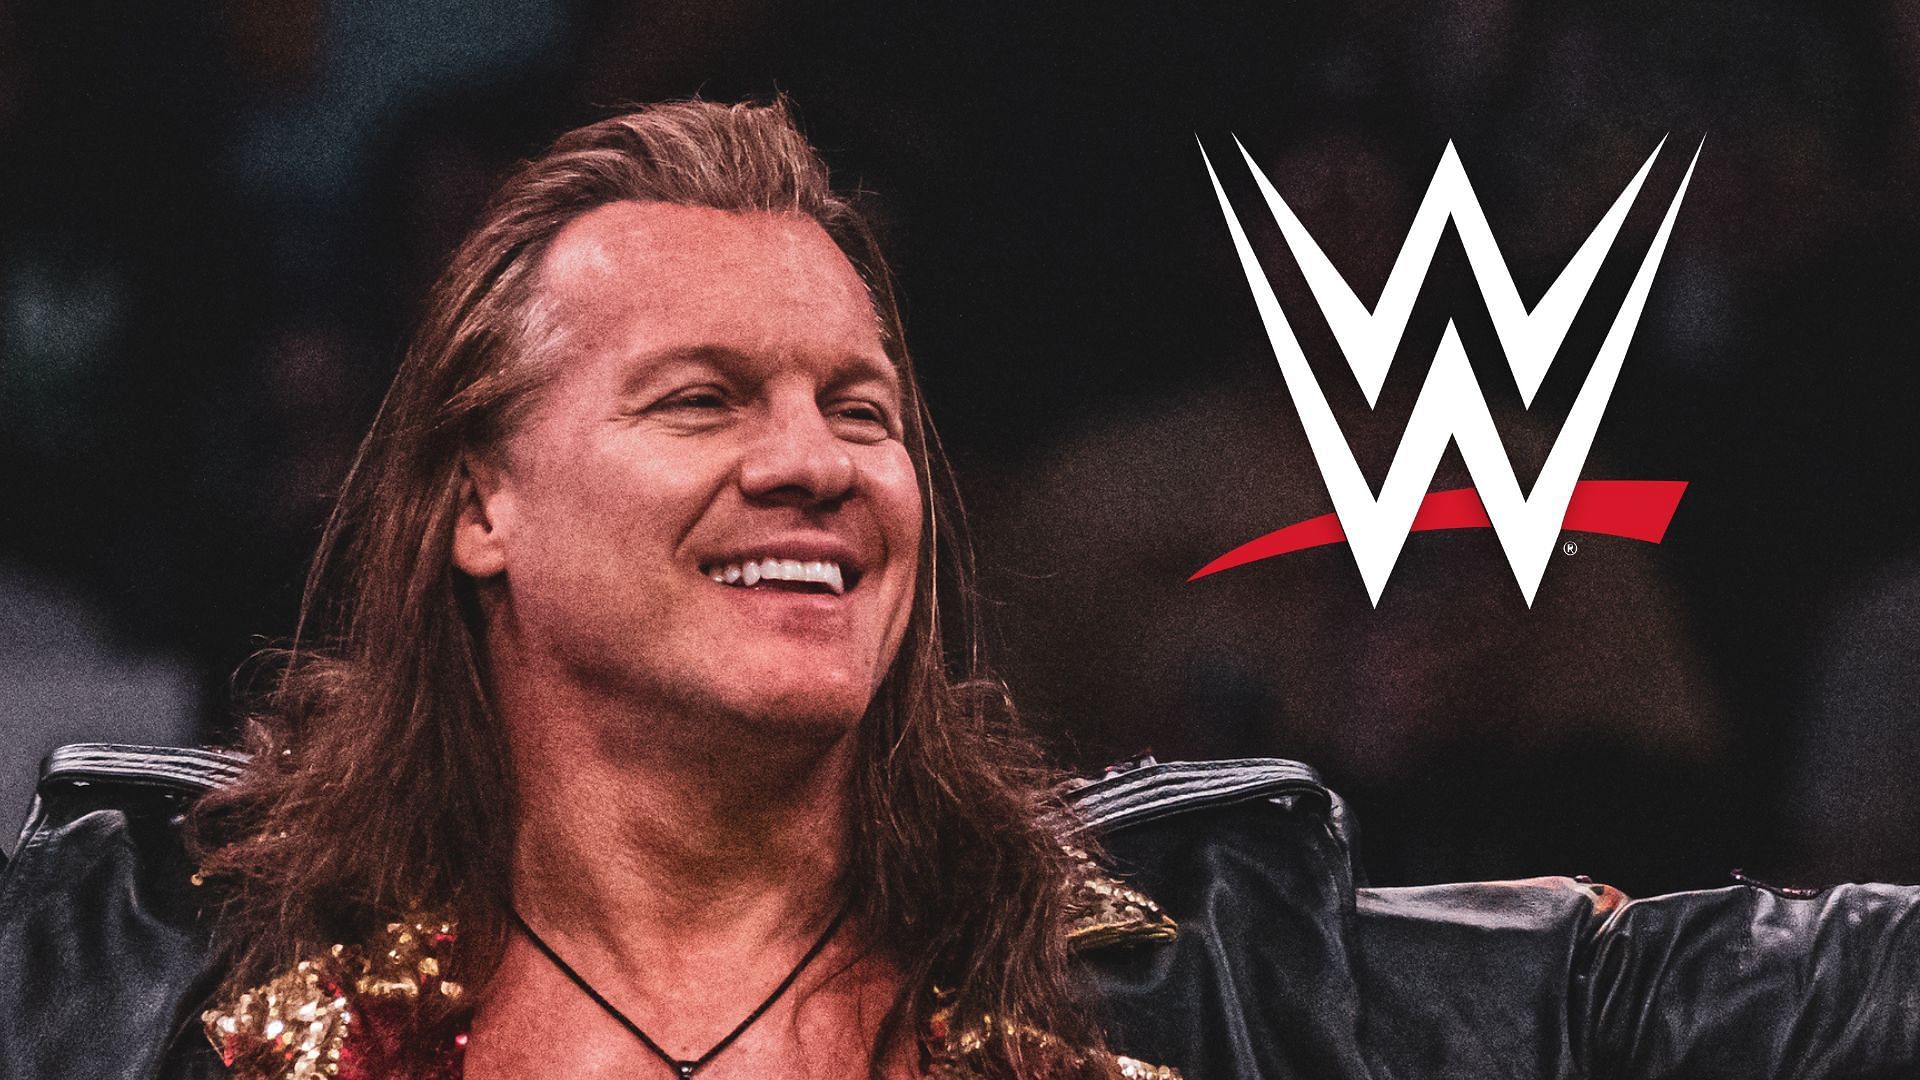 Chris Jericho sees a former WWE Superstar as a true ratings draw